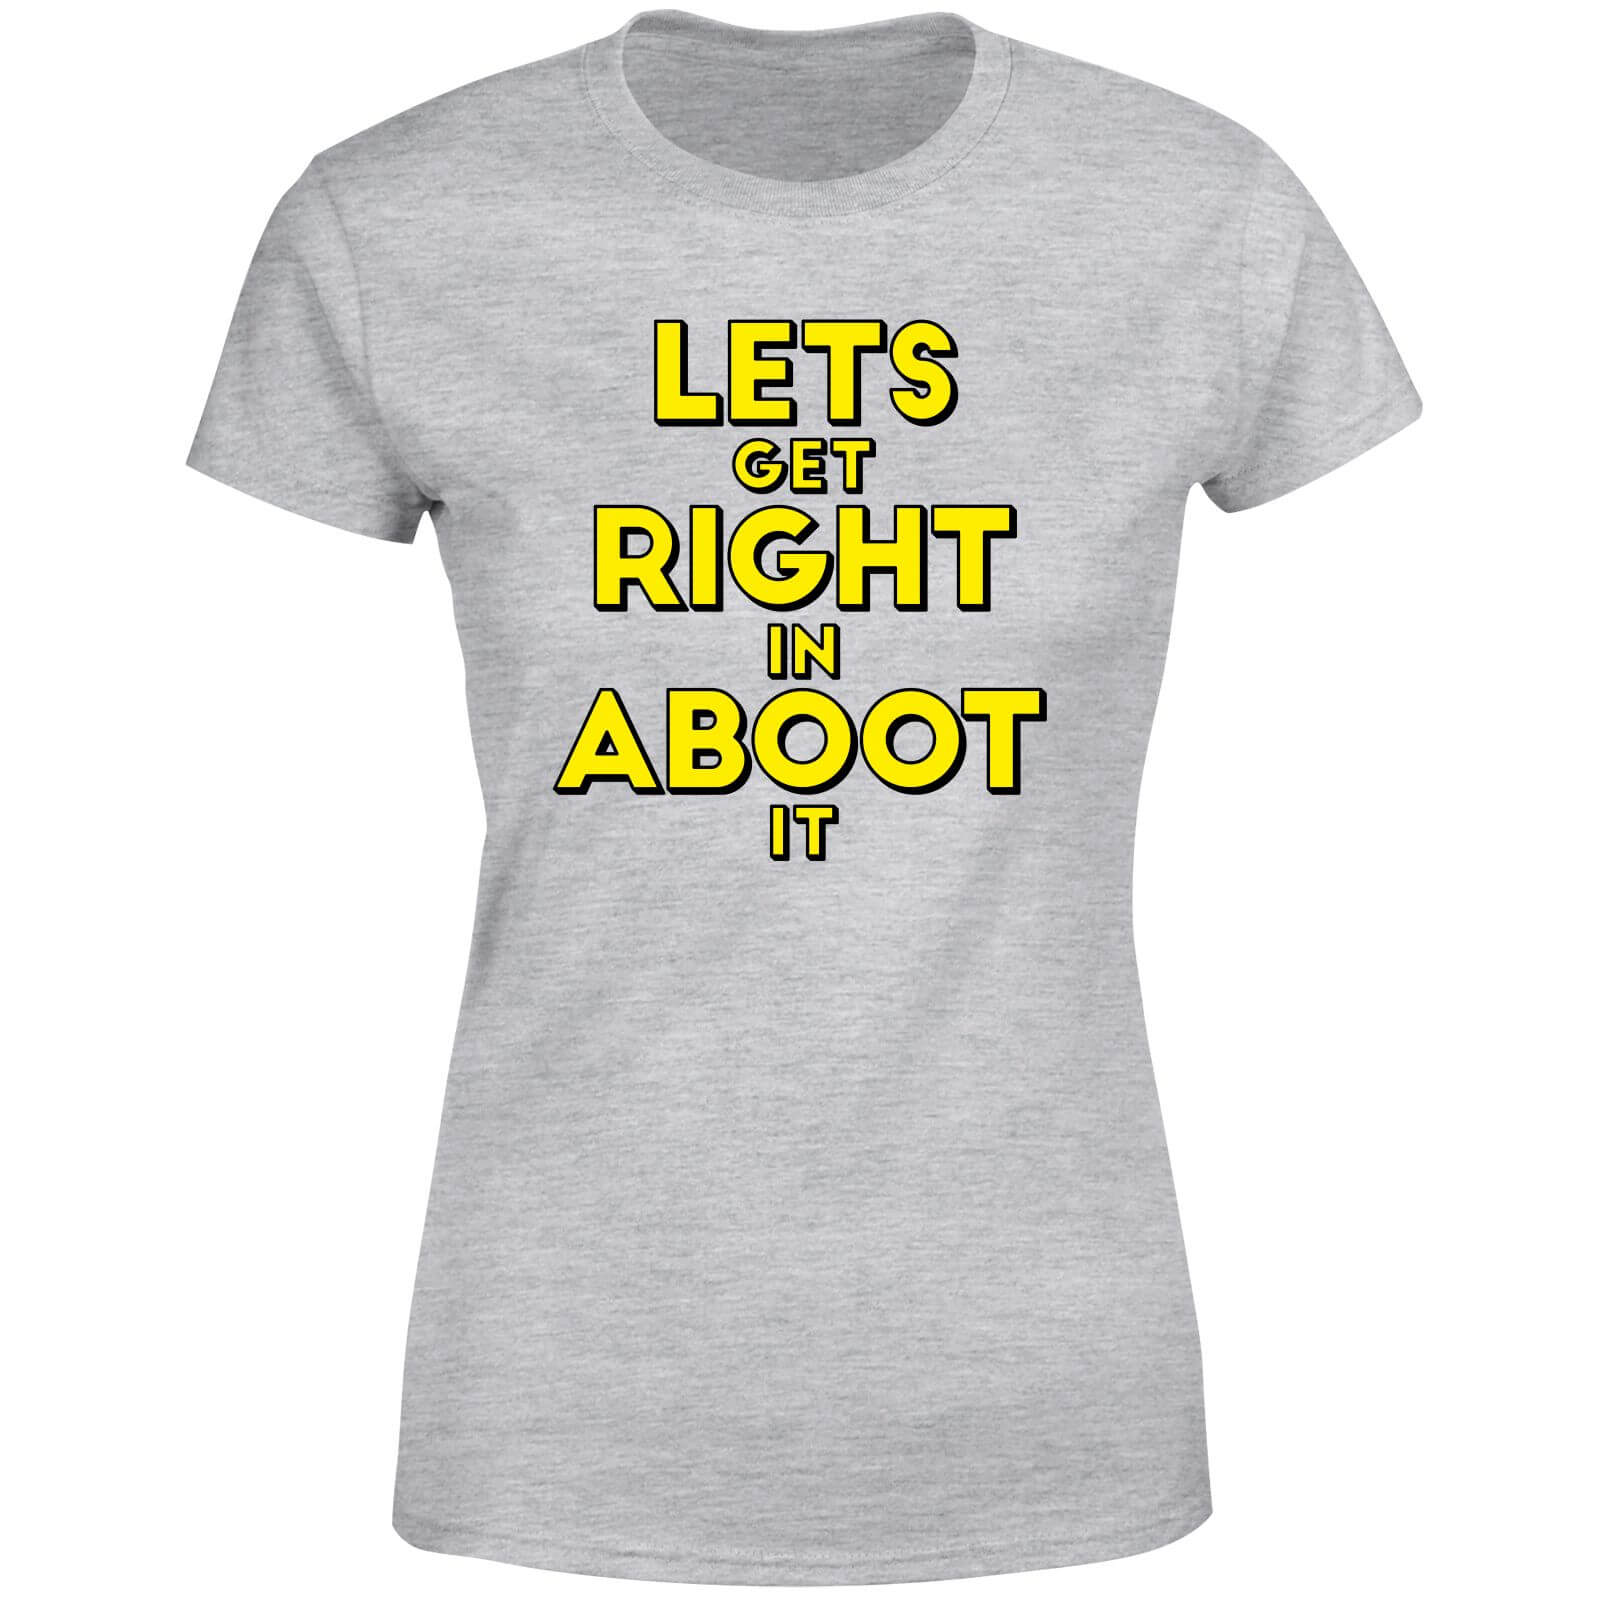 Let's Get Right In Aboot It Women's T-Shirt - Grey - 3XL - Grey